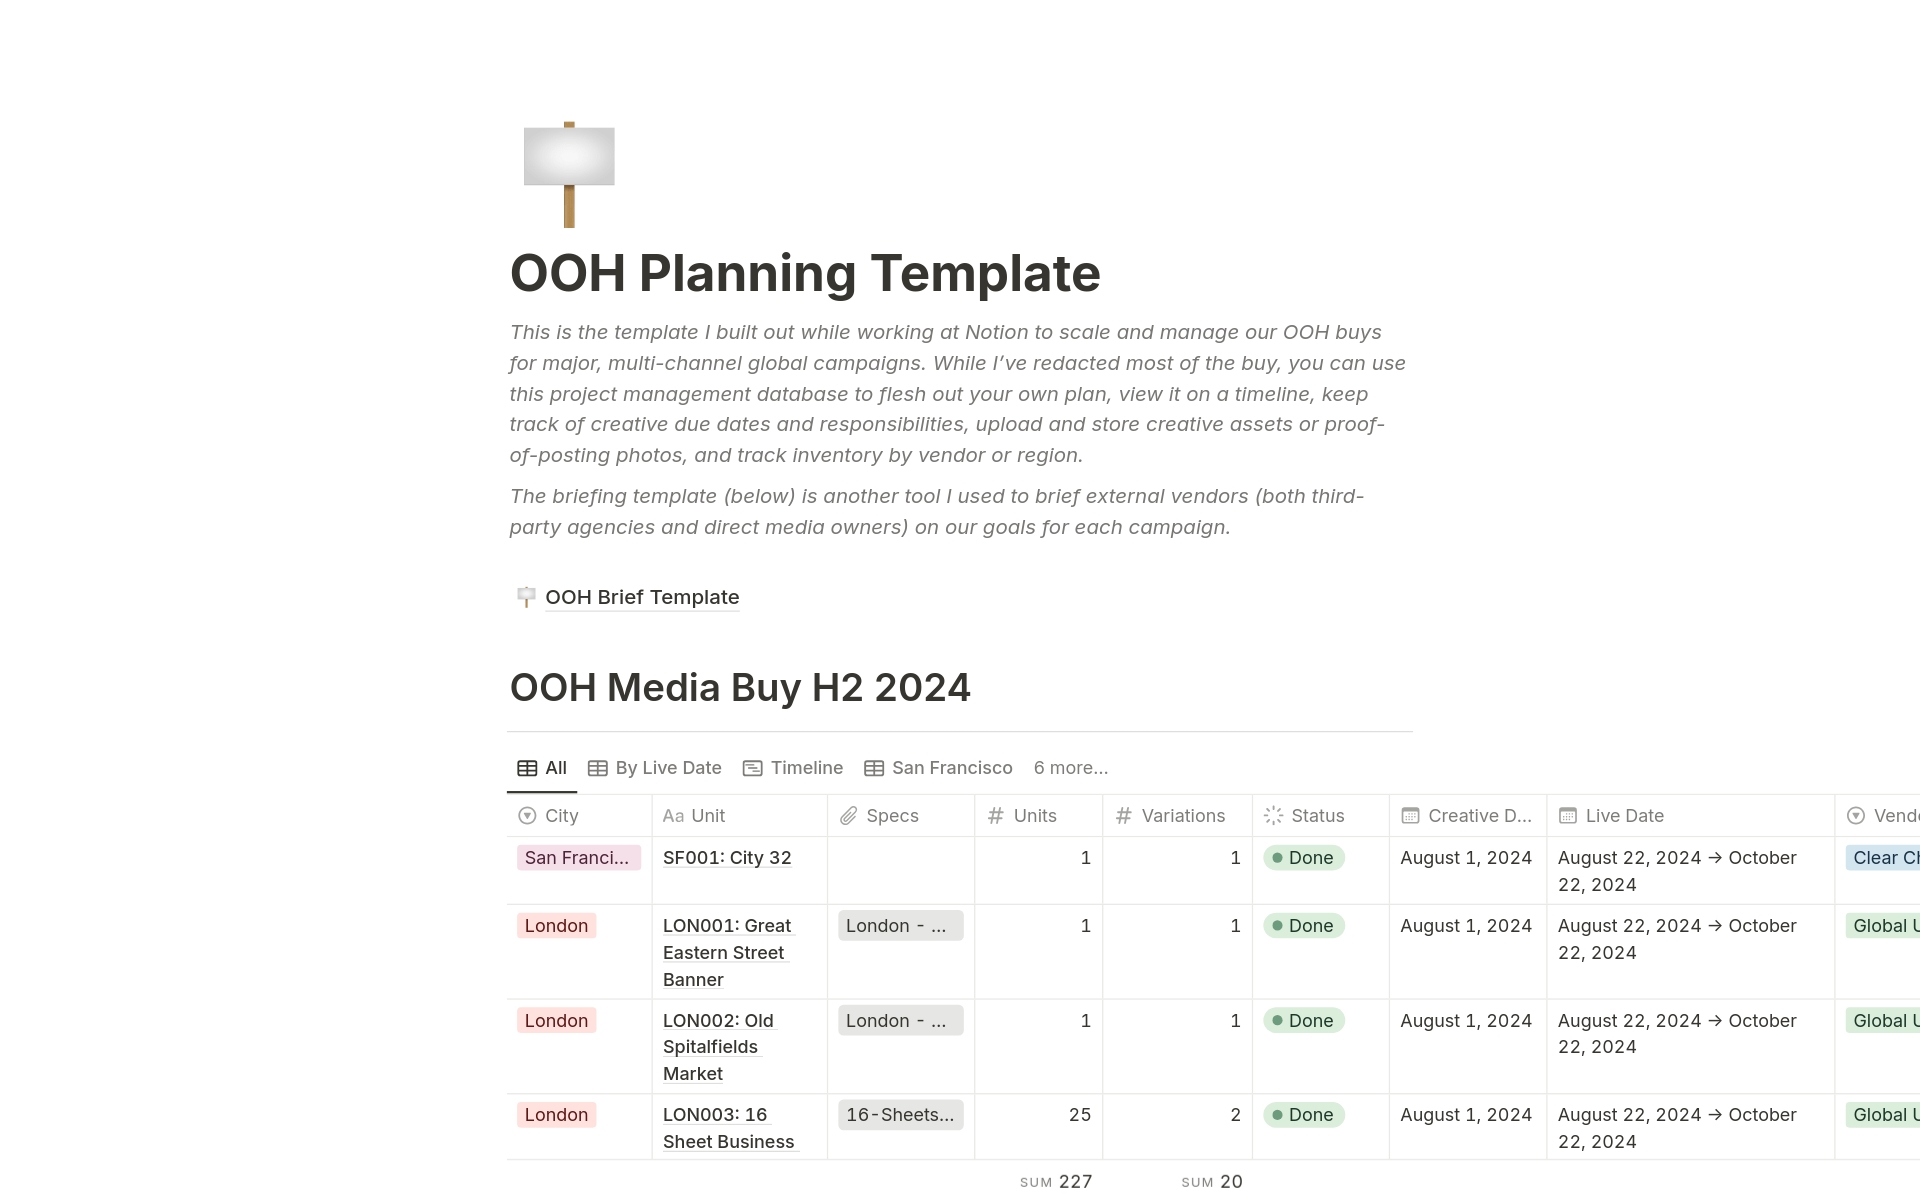 I built this project management template while working at Notion to scale and manage our OOH buys for major, multi-channel global campaigns. Use it to plan and track your inventory, creative assets and due dates, vendors, and impressions.